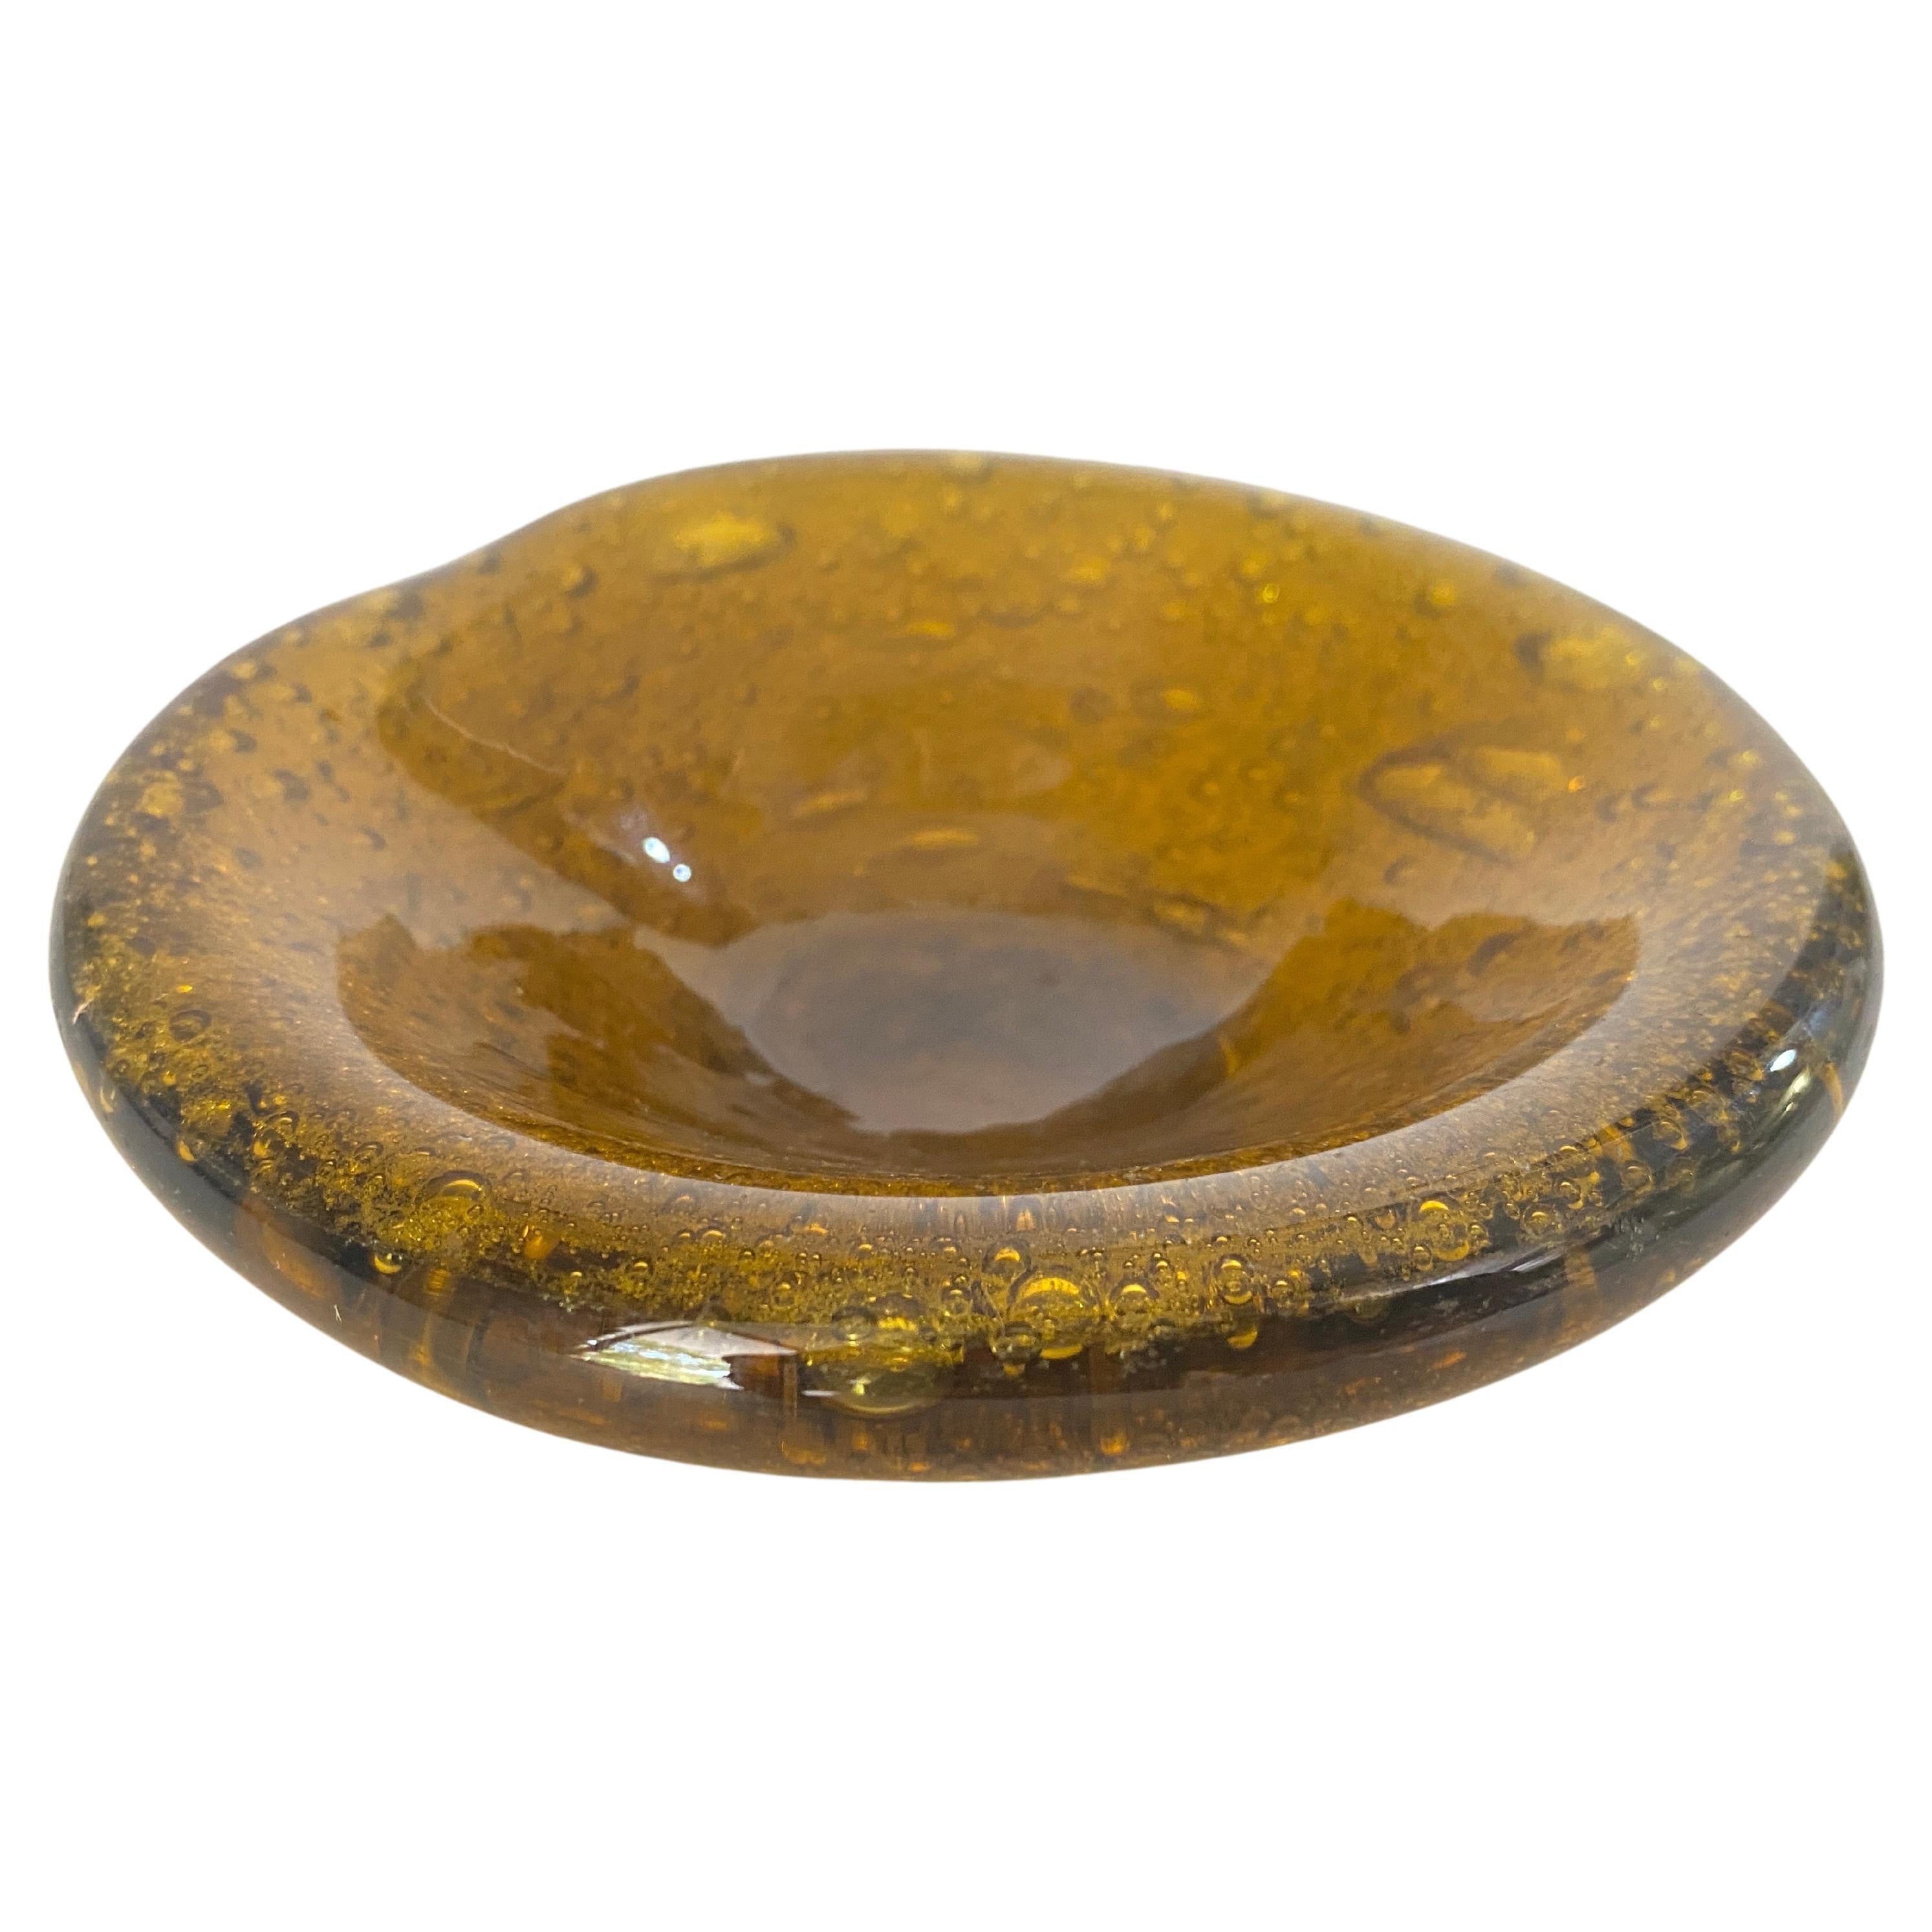 Vide Poche or Ashtray in Glass, Bubles Patterns France, circa 1970 From Biot For Sale